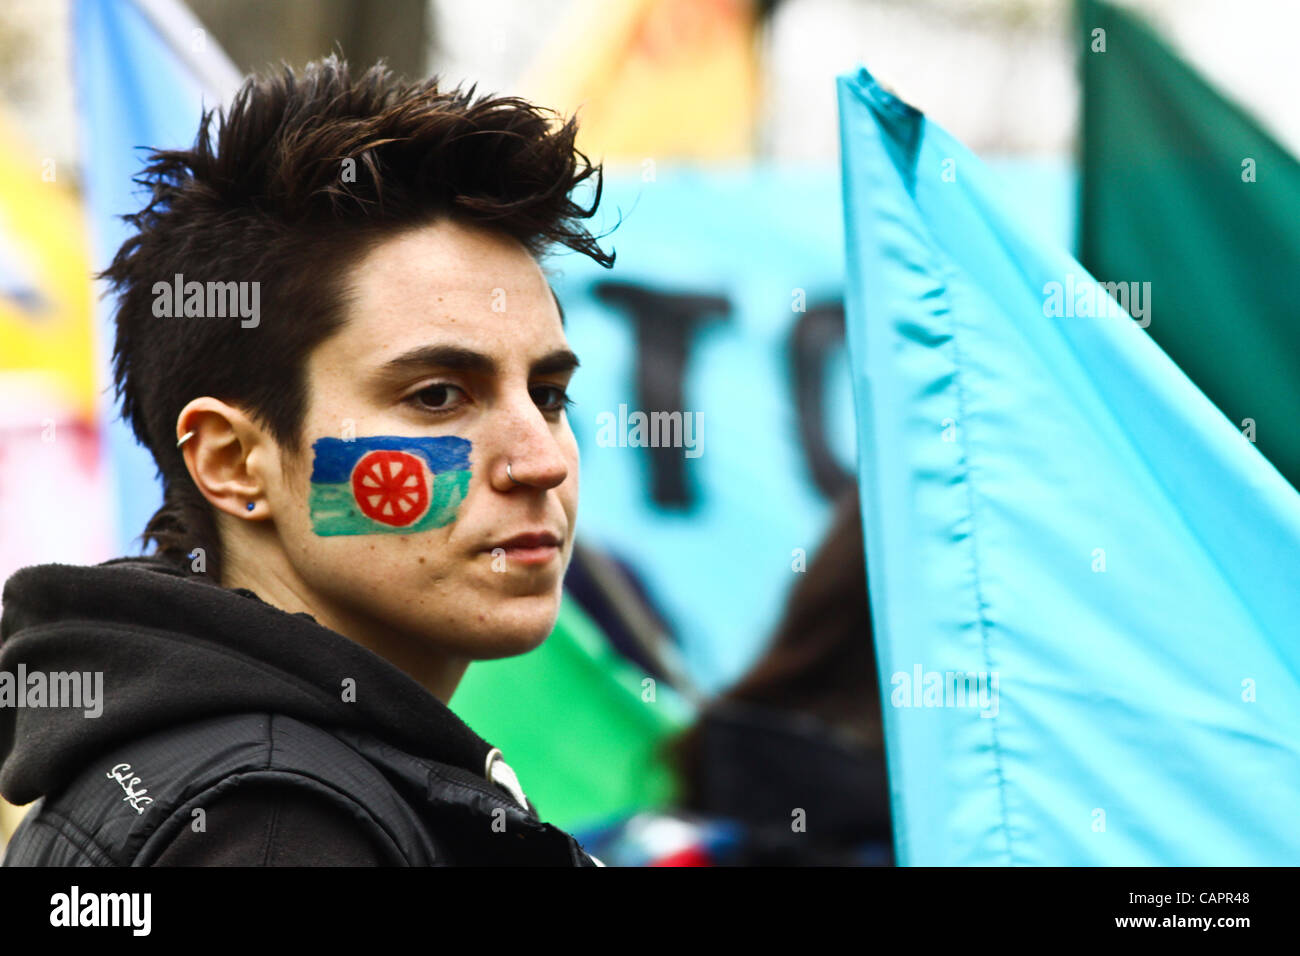 London, UK. 08/04/2012. A protester with the Roma flag painted on her face. 8th April marks Roma Nation Day. Stock Photo